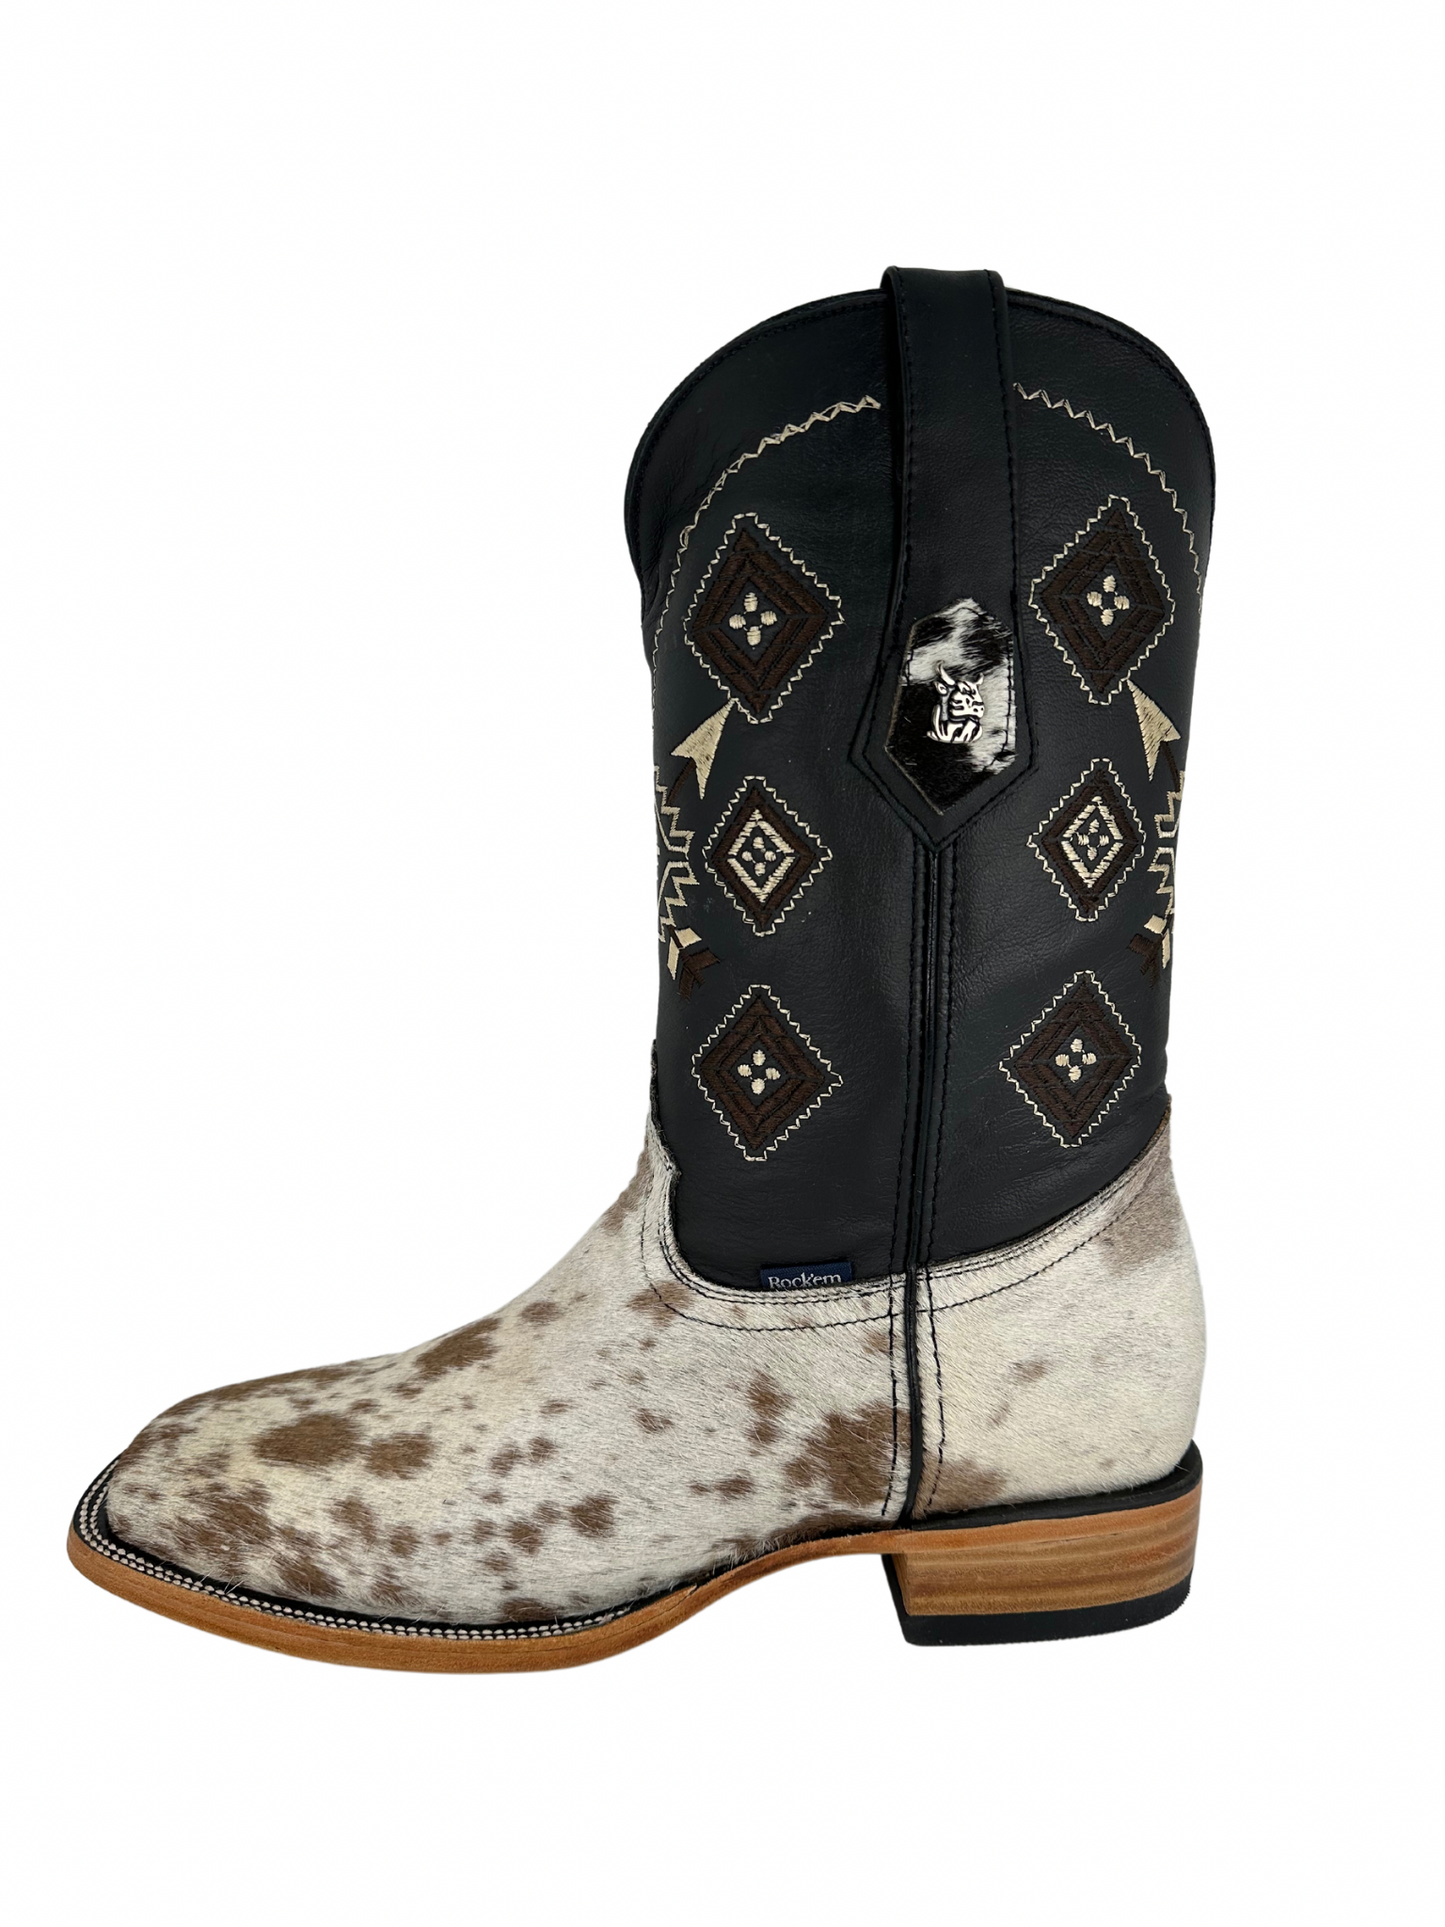 Rock'em Men's Cow Hair Boots Size 10.5 *AS SEEN ON IMAGE*